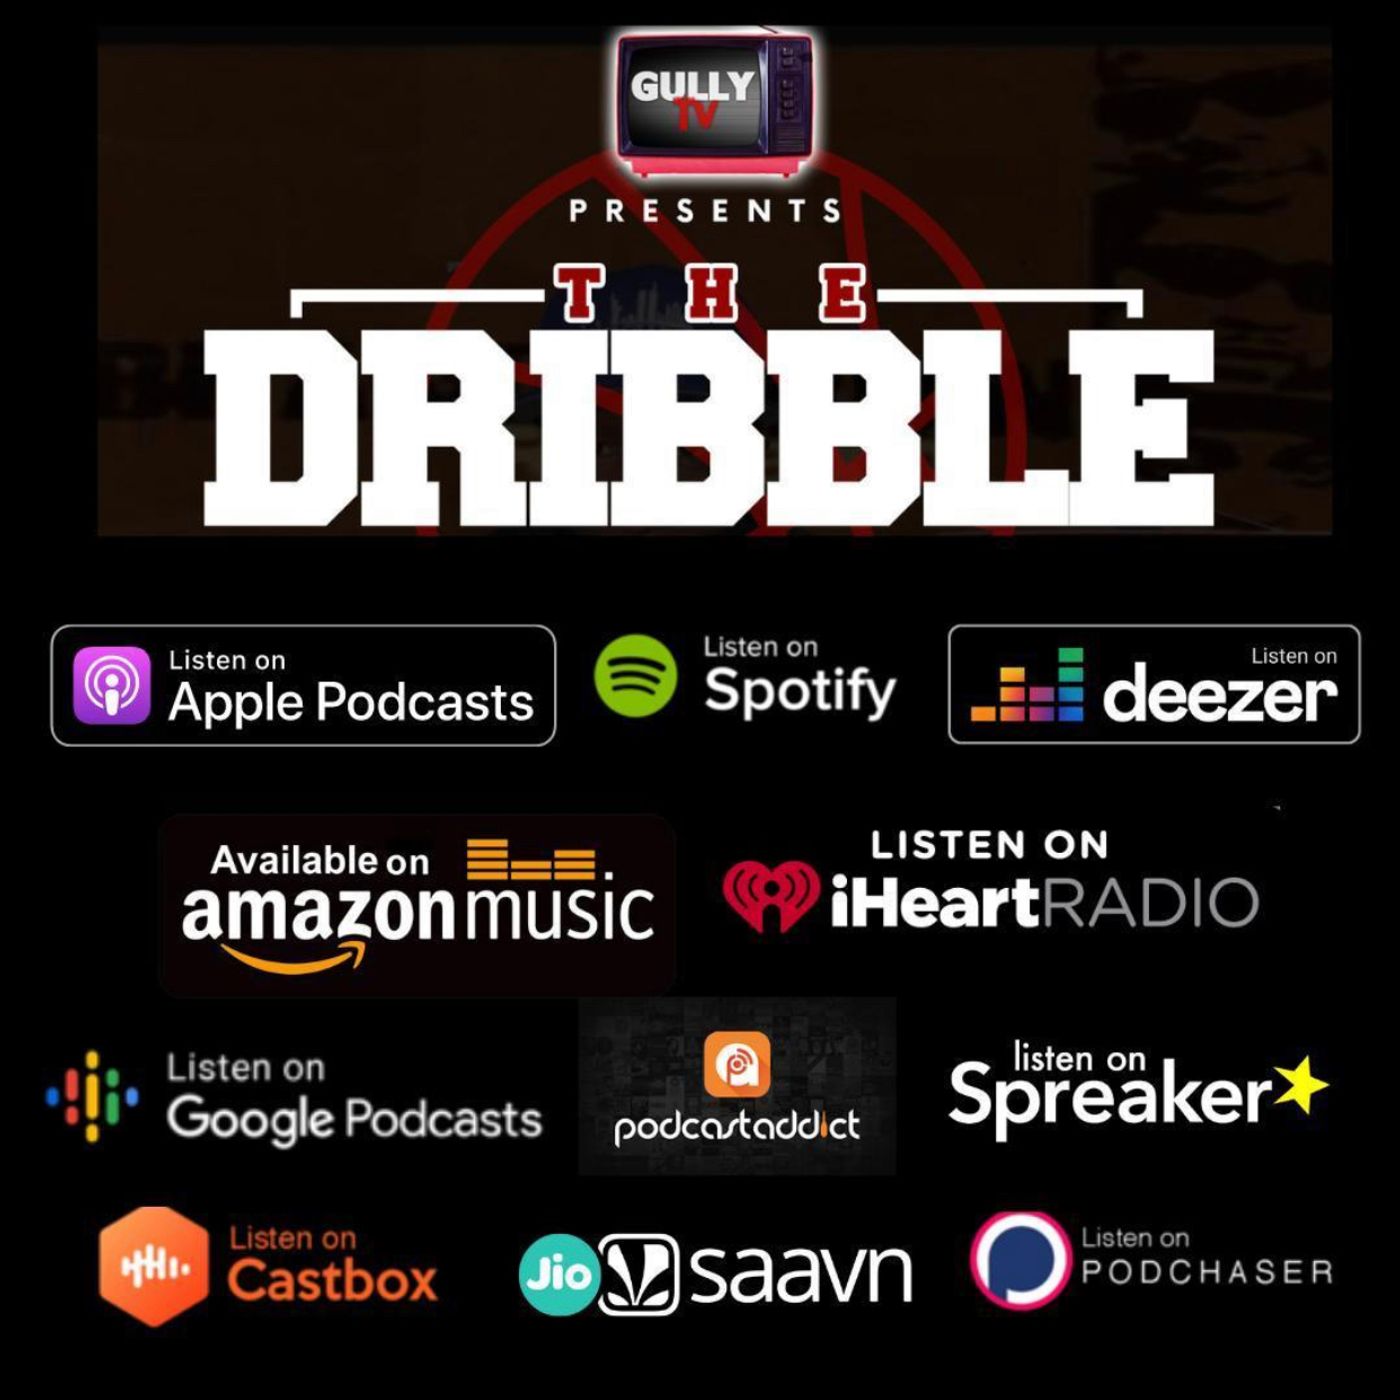 Gully Tv Presents...The Dribble